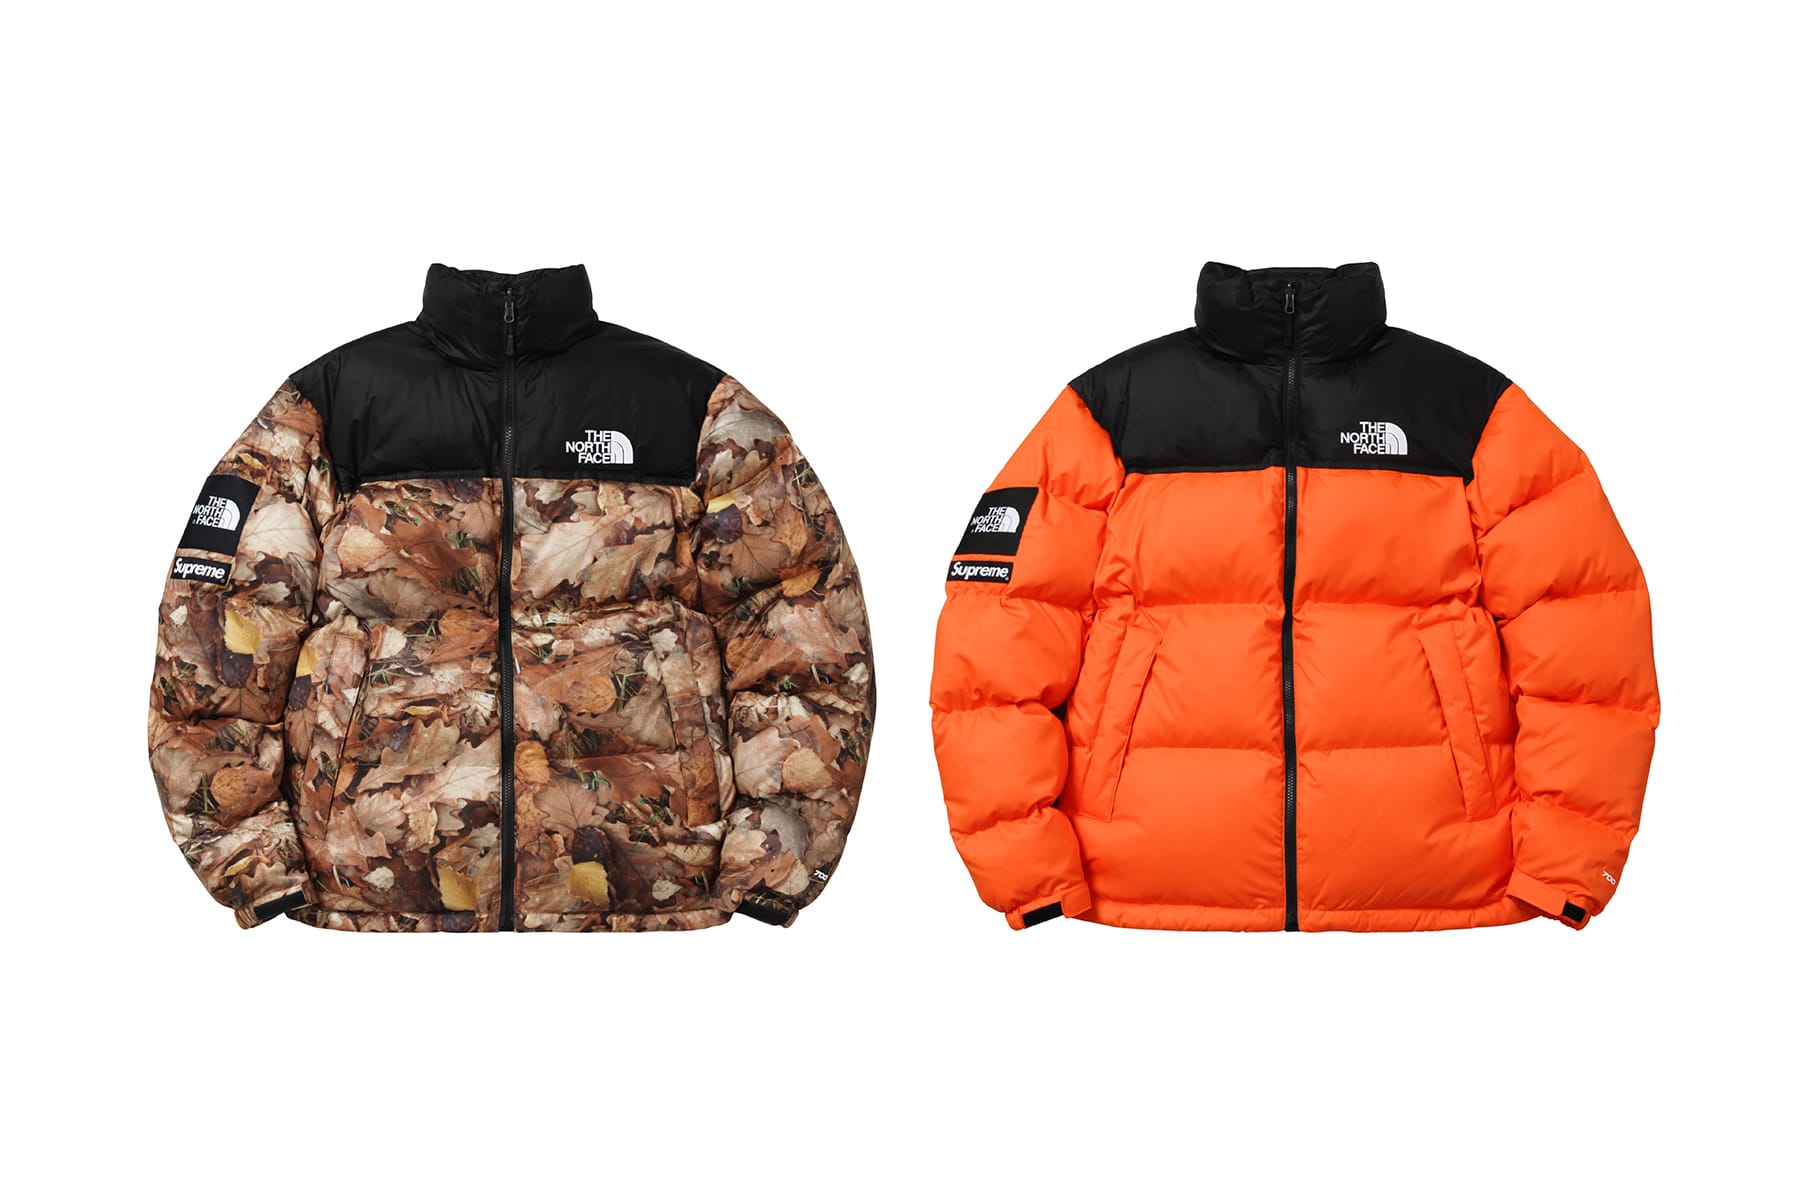 Supreme North Face Jacket Price Clearance Sale, UP TO 66% OFF 